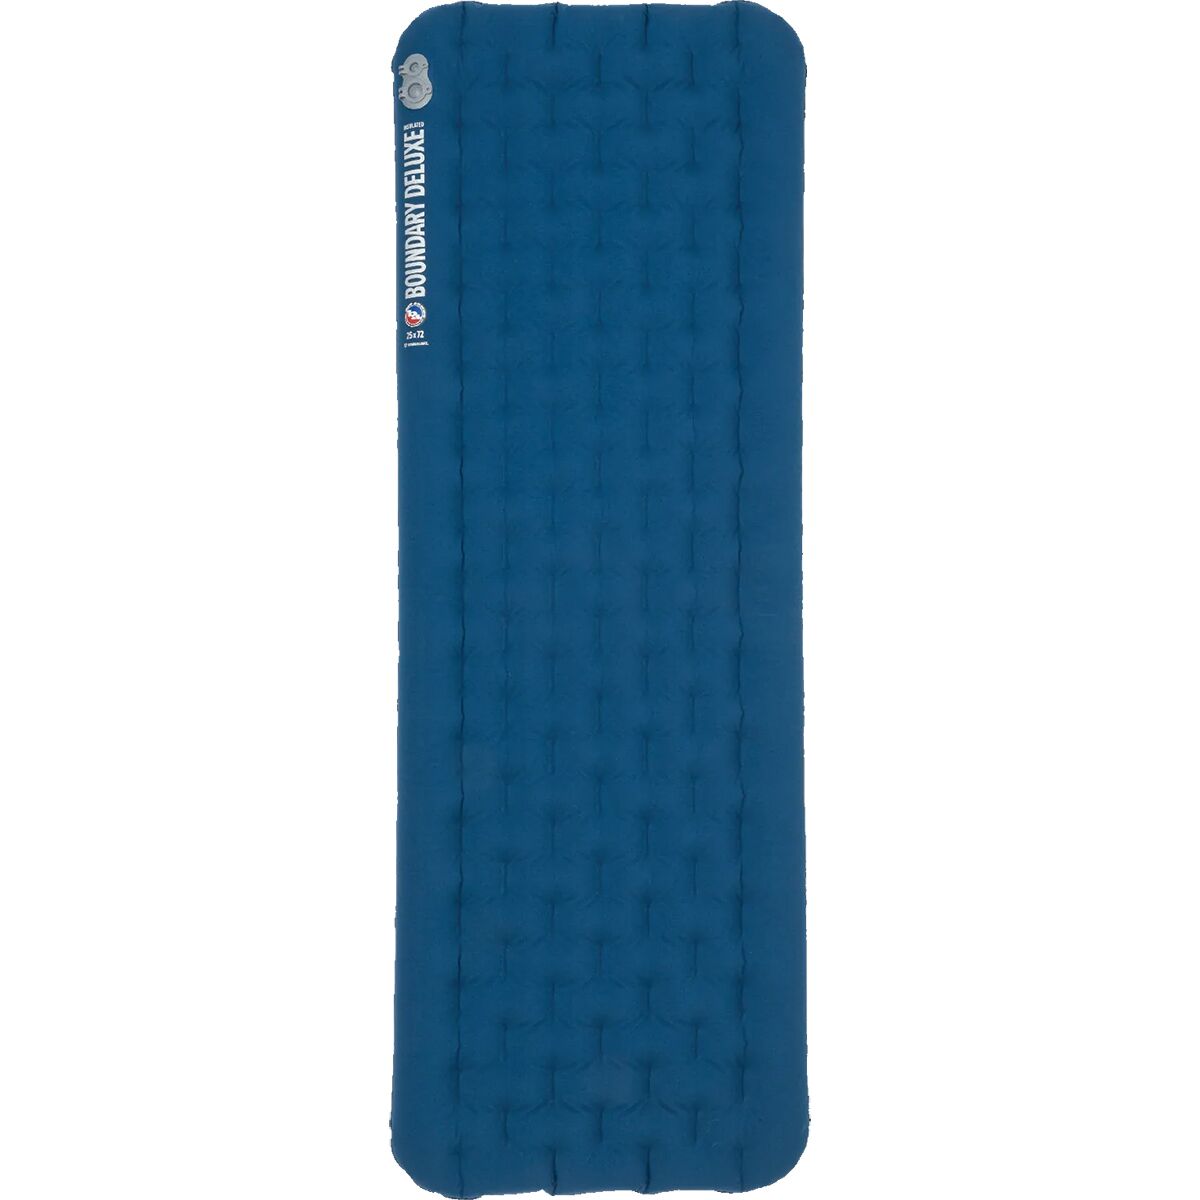 Photos - Camping Mat Big Agnes Boundary Deluxe Insulated Sleeping Pad 